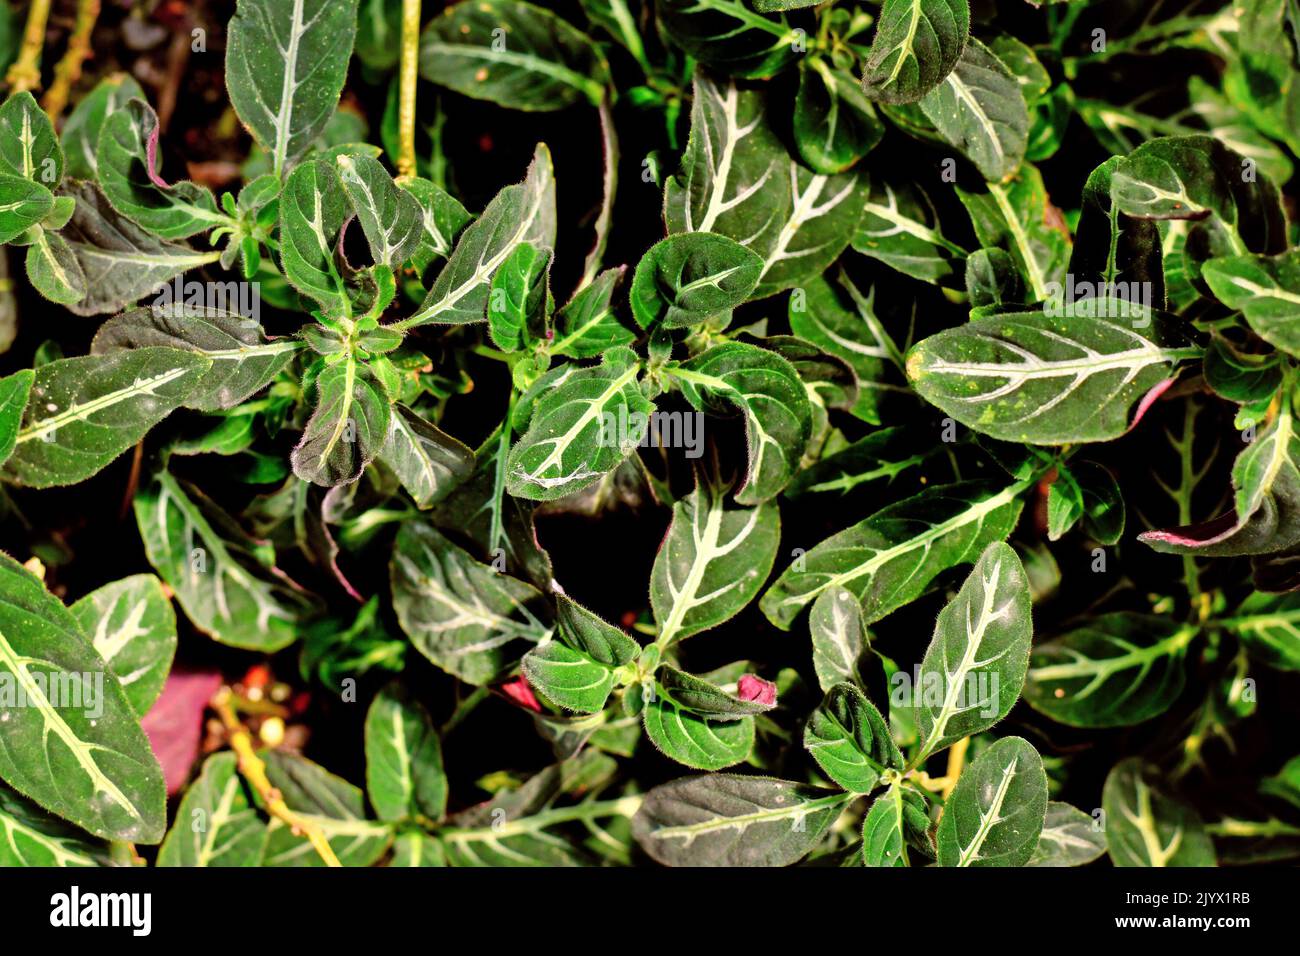 Top view of tropical 'Ruellia Devosiana' plant with narrow leaves with white veins Stock Photo